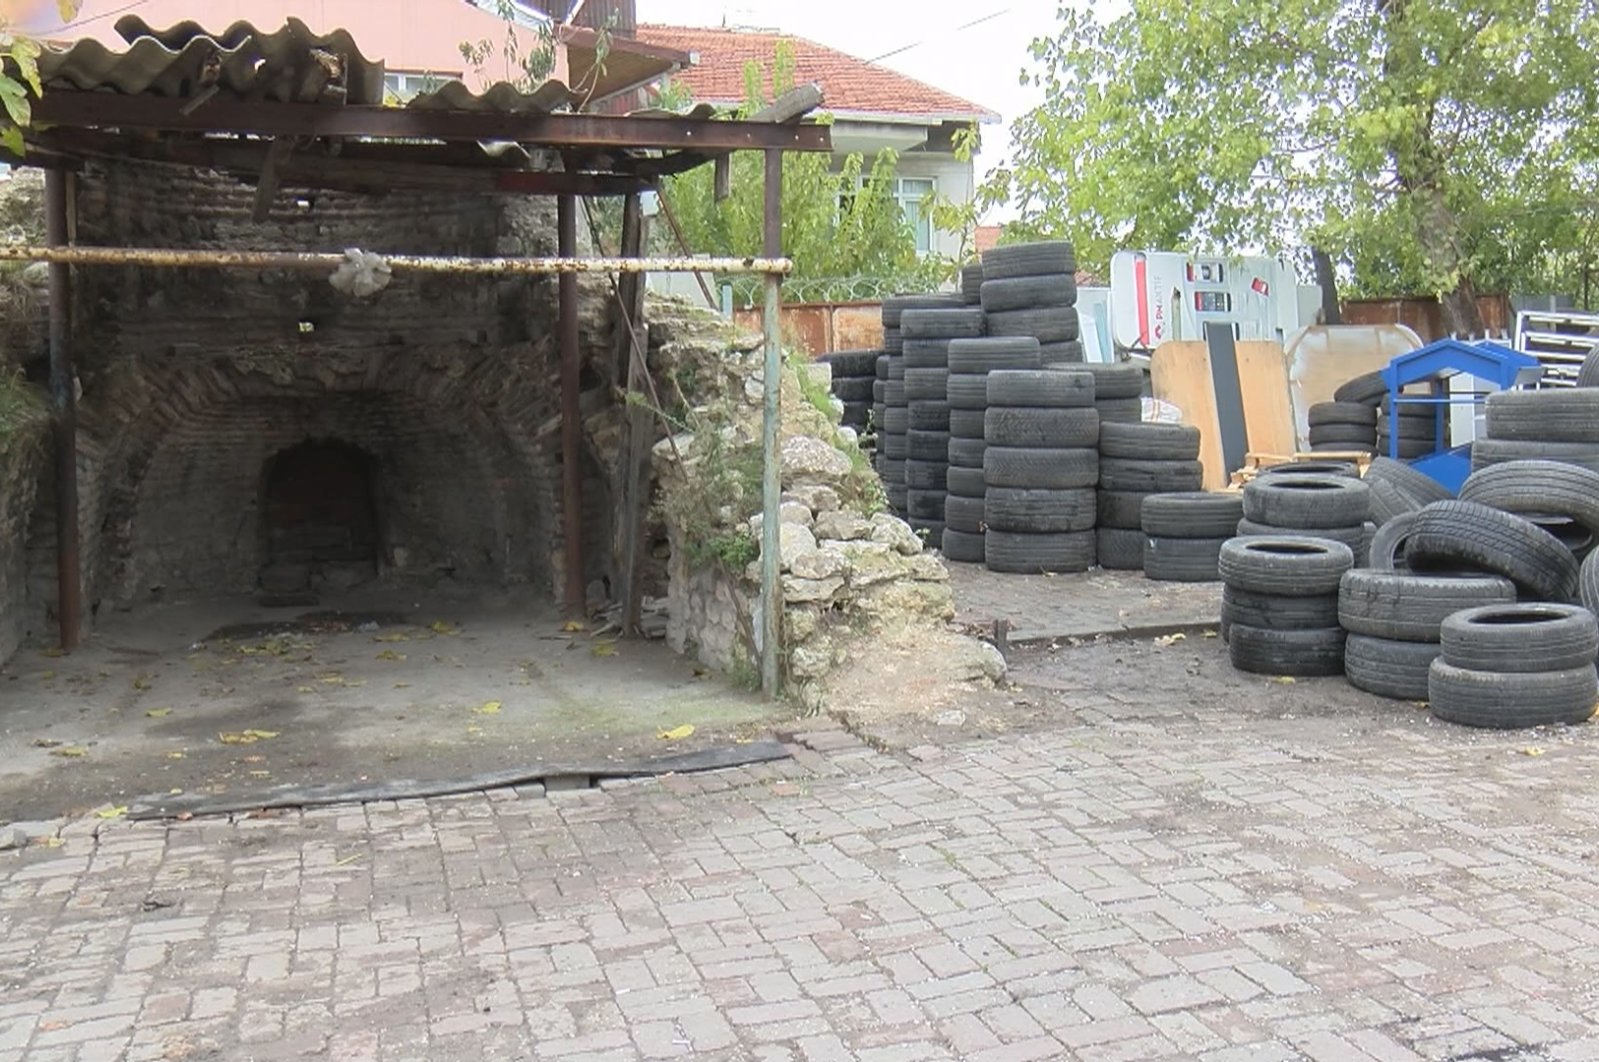 A view of the chapel next to stacks of tires, in Istanbul, Turkey, Dec. 6, 2020. (DHA Photo)